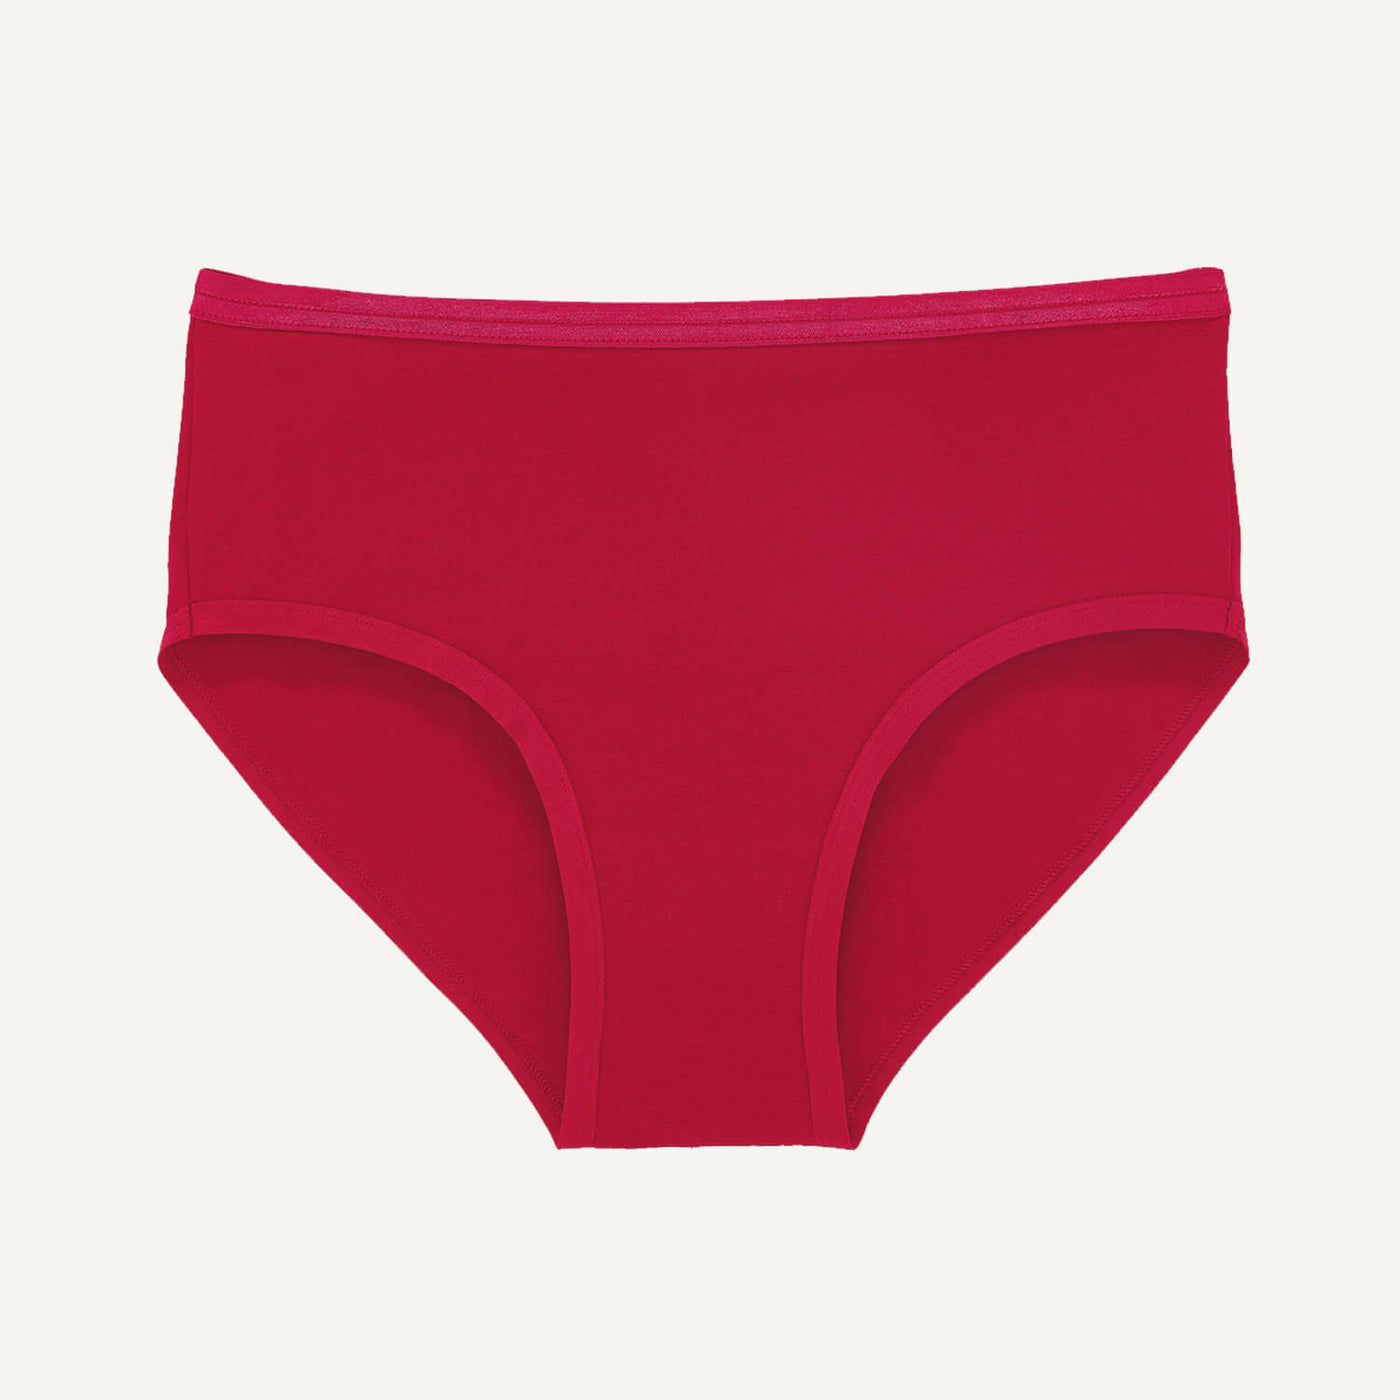 SALE Mid-Rise Brief in Cherry